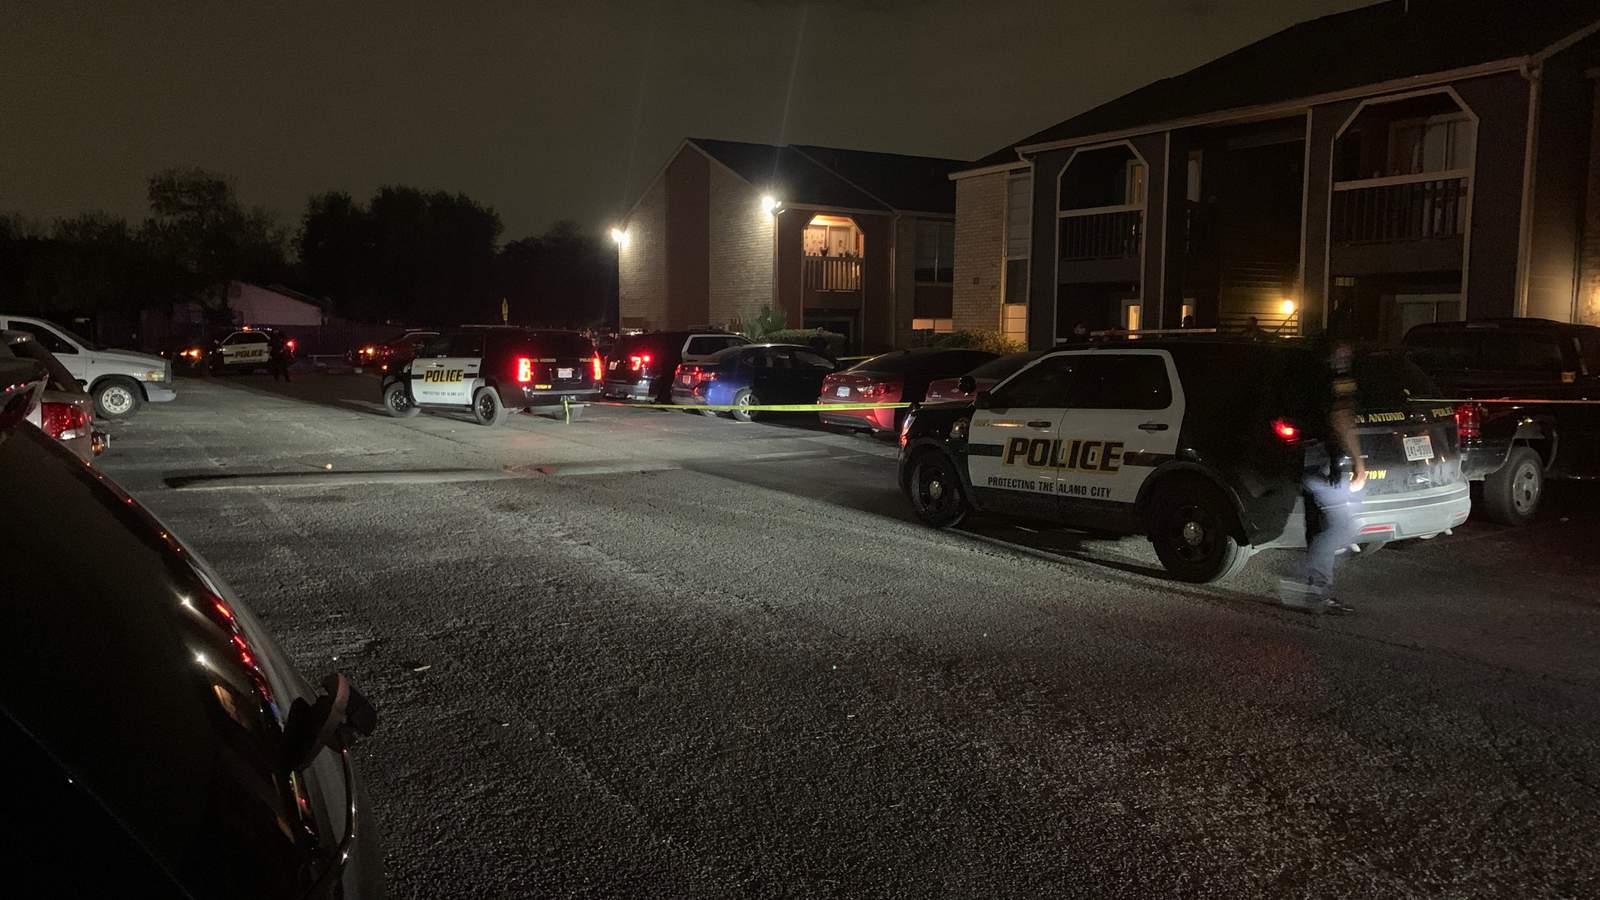 Young boy hospitalized in ‘very critical condition’ after accidentally shooting himself in head, police say